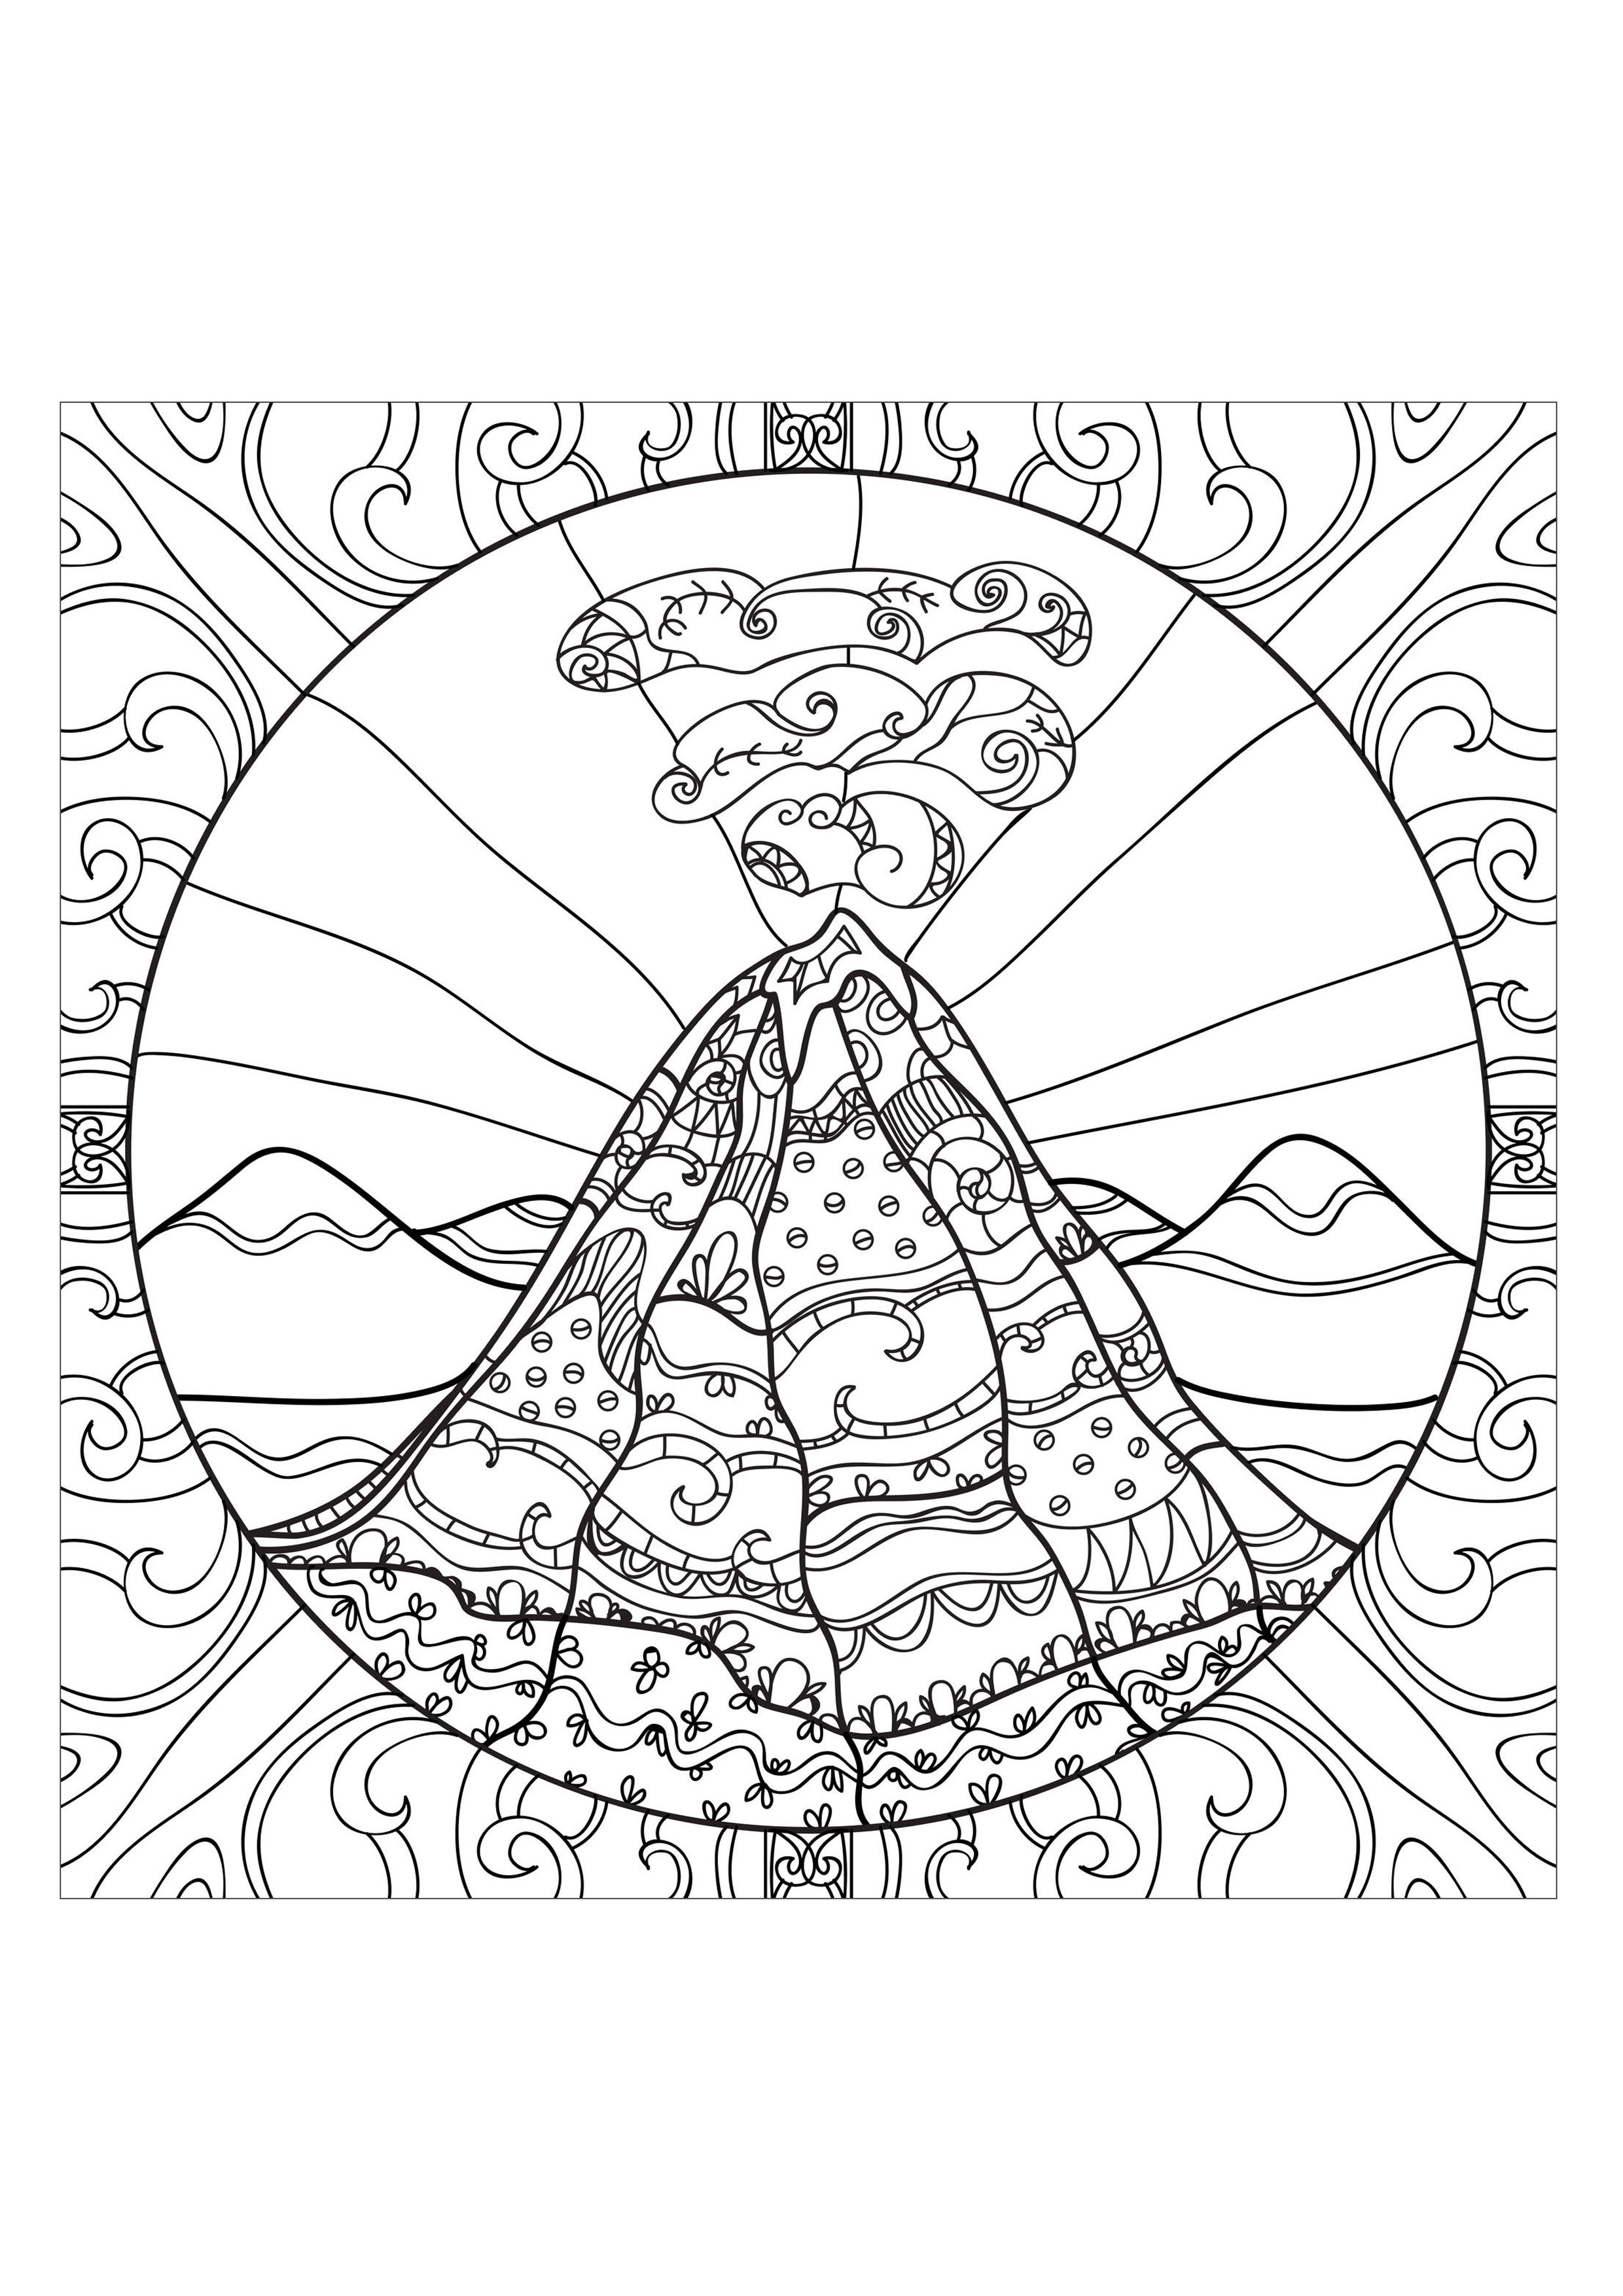 Volcano 2 Anti Stress Adult Coloring Pages